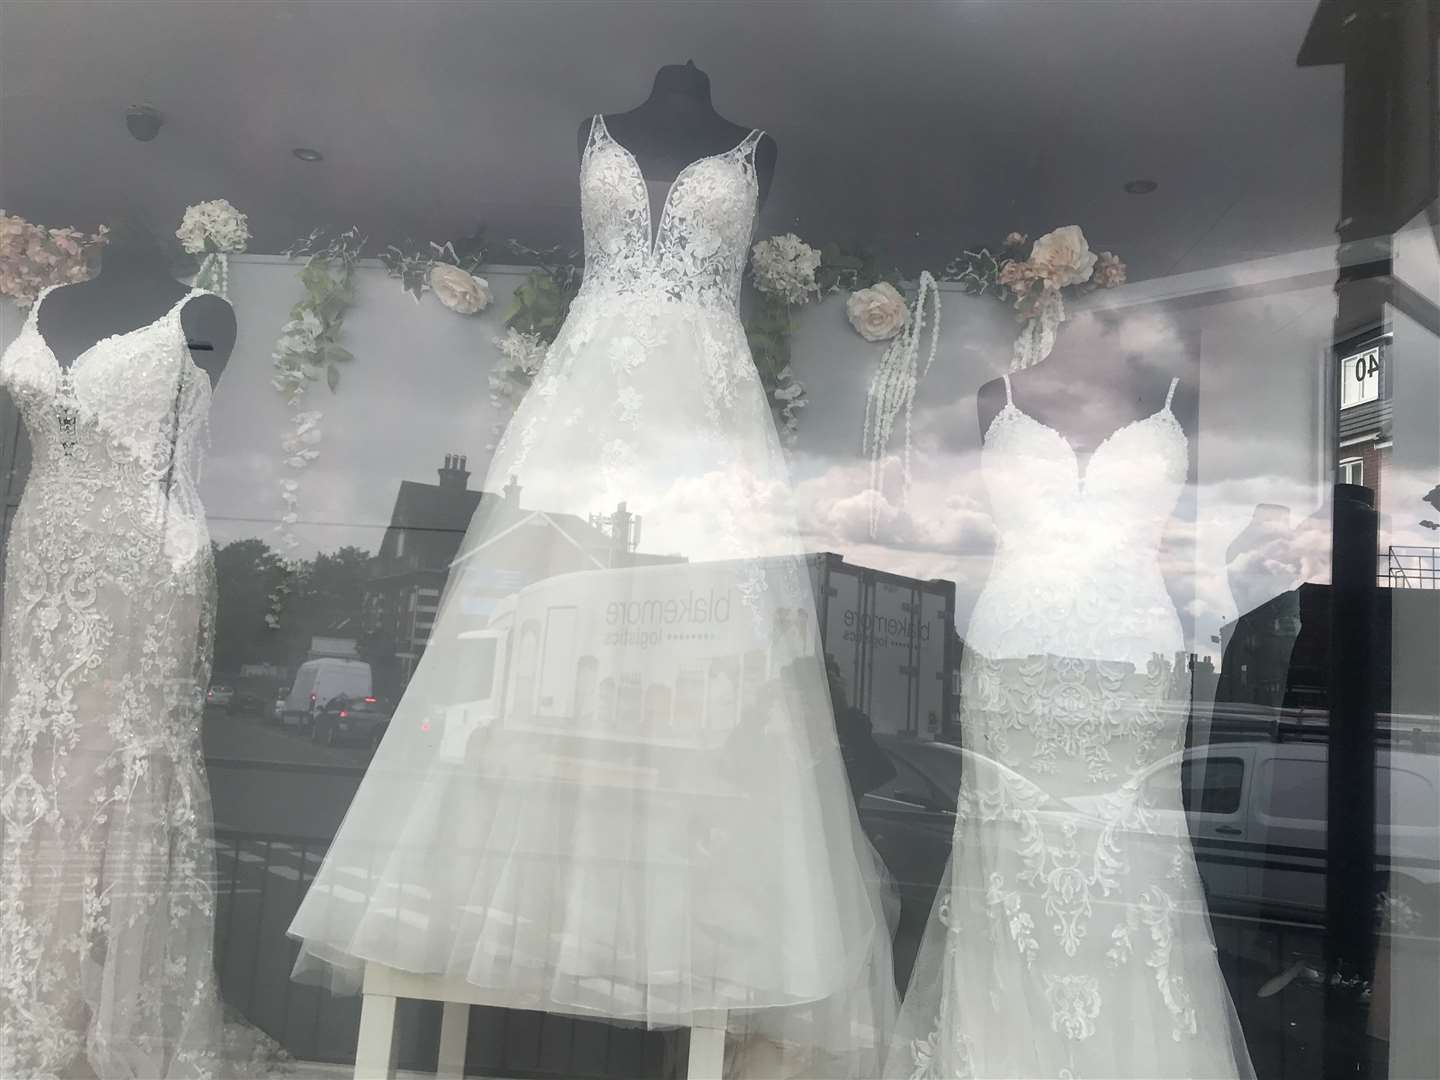 Designer gowns in the window at the Strood bridal shop before it closed